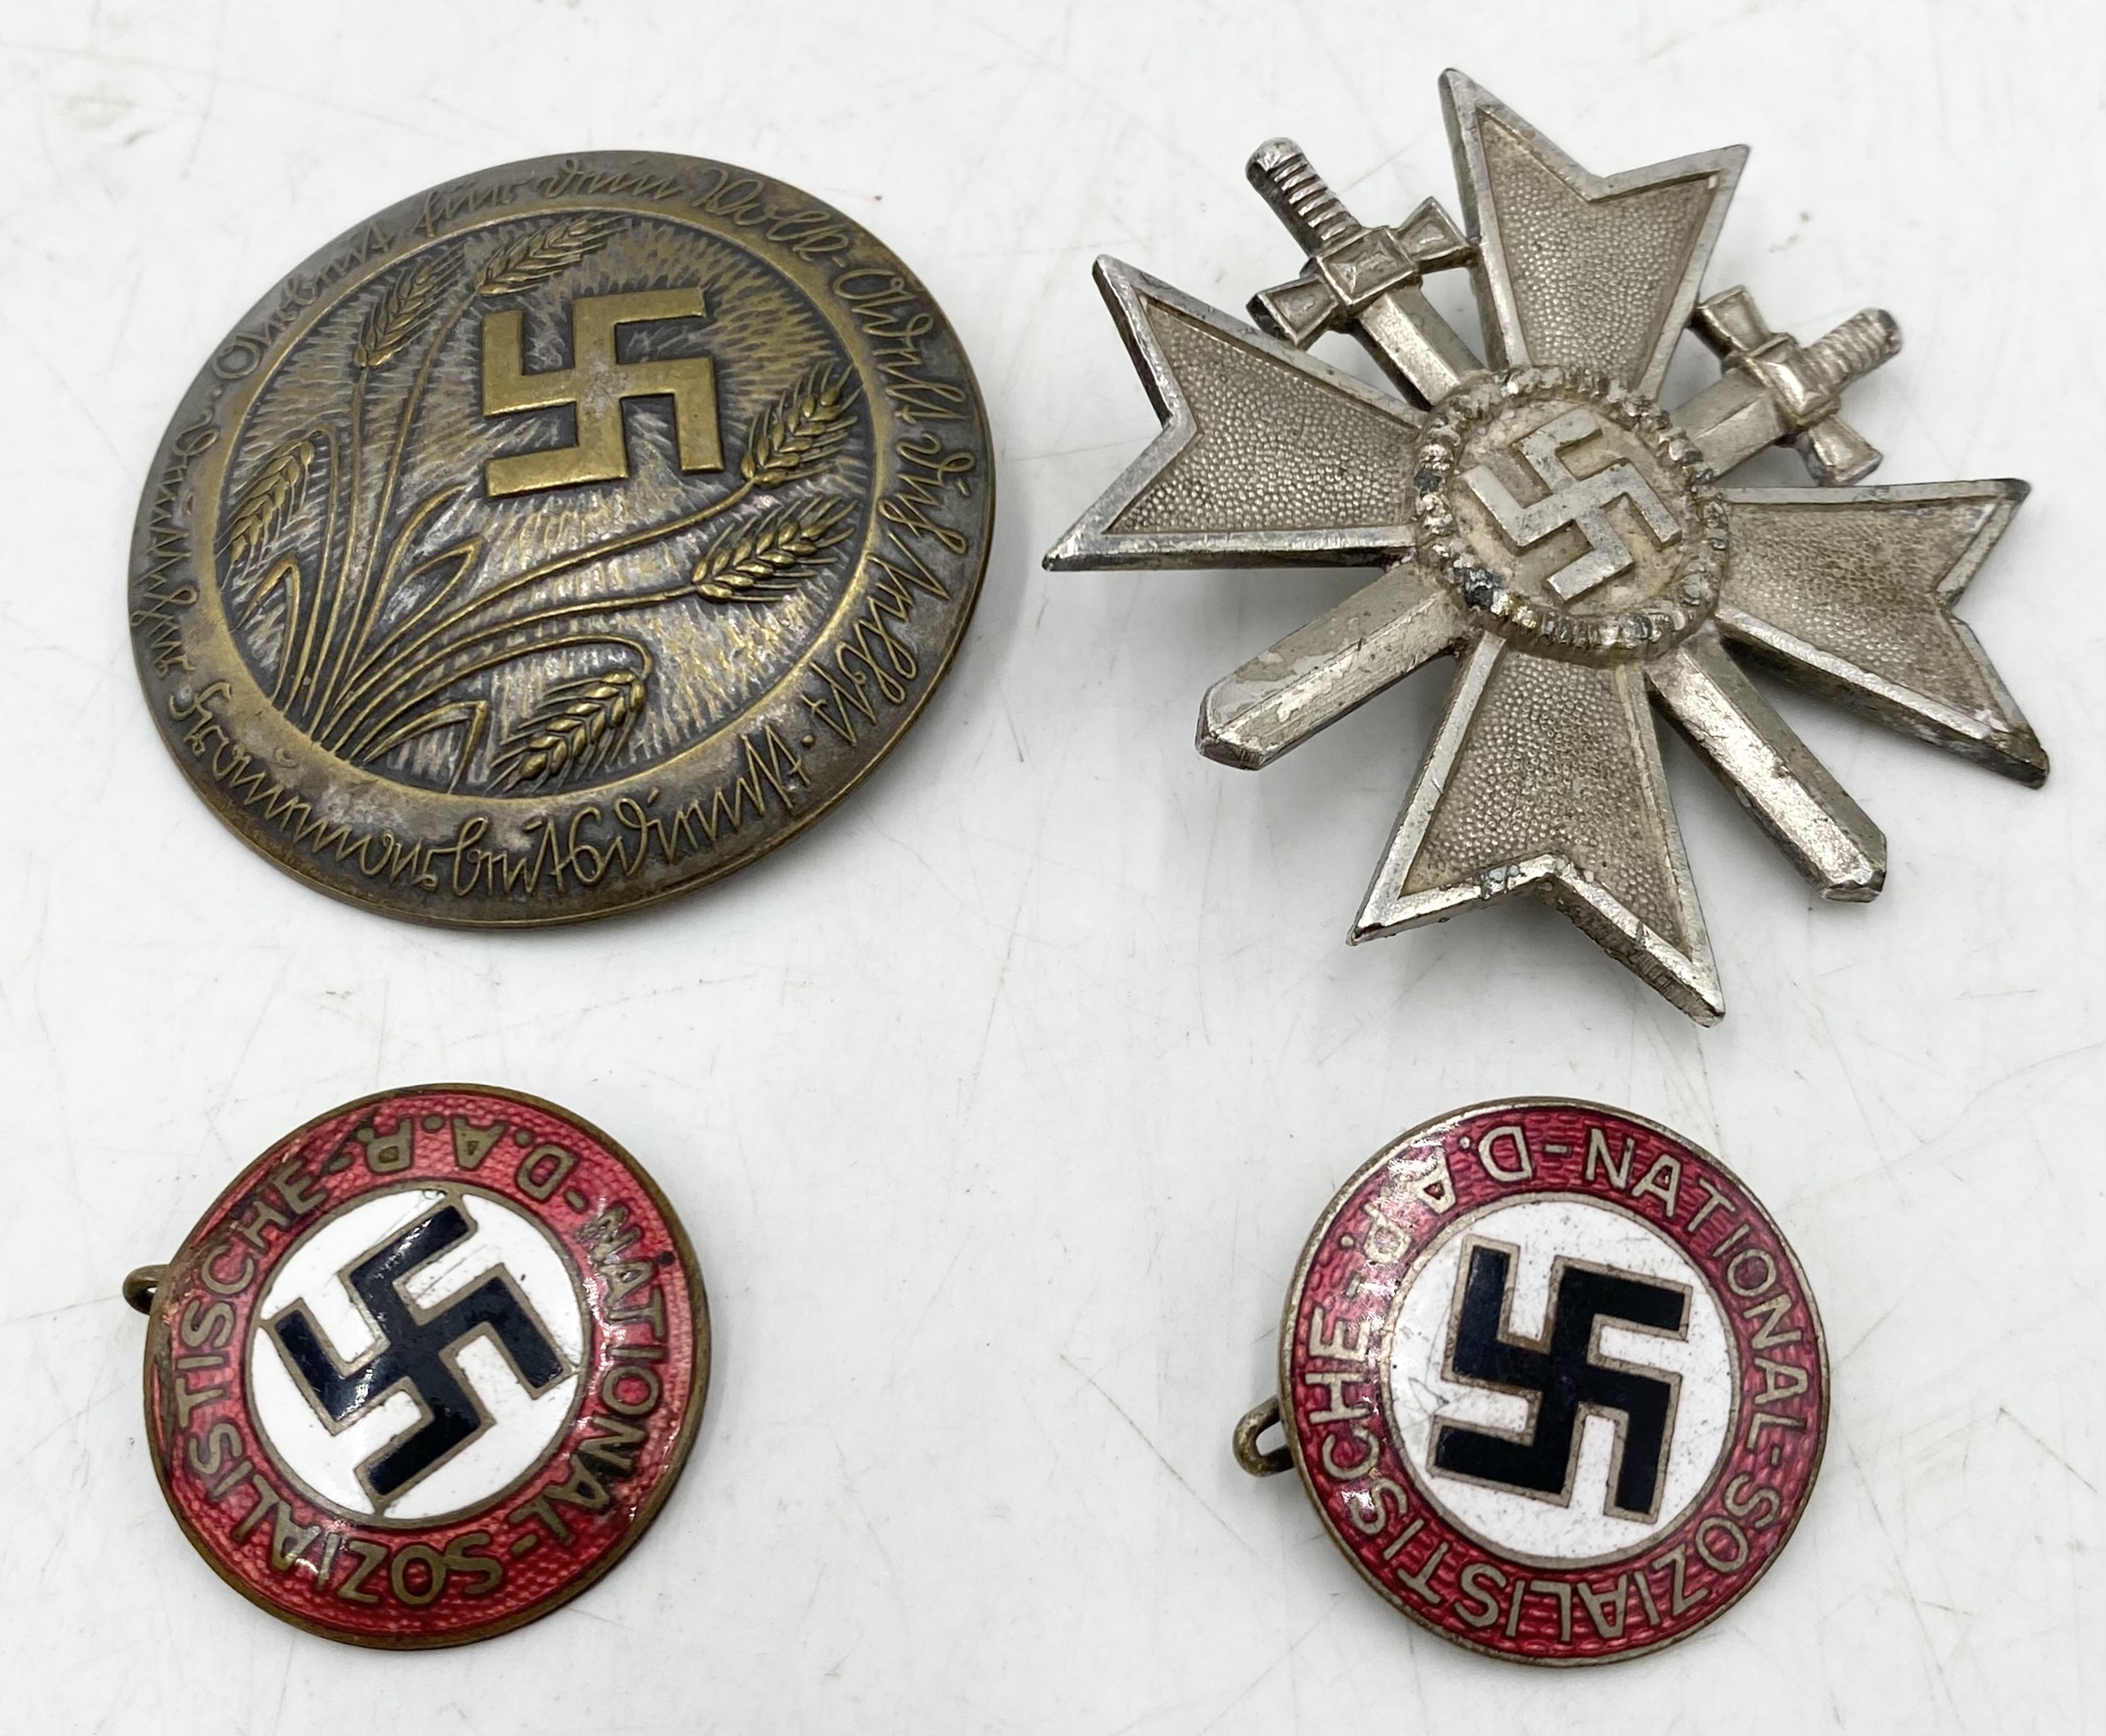 Two WWII German NSDAP party badges, a War Merit Cross 1939 (marked L15) along with a Third Reich